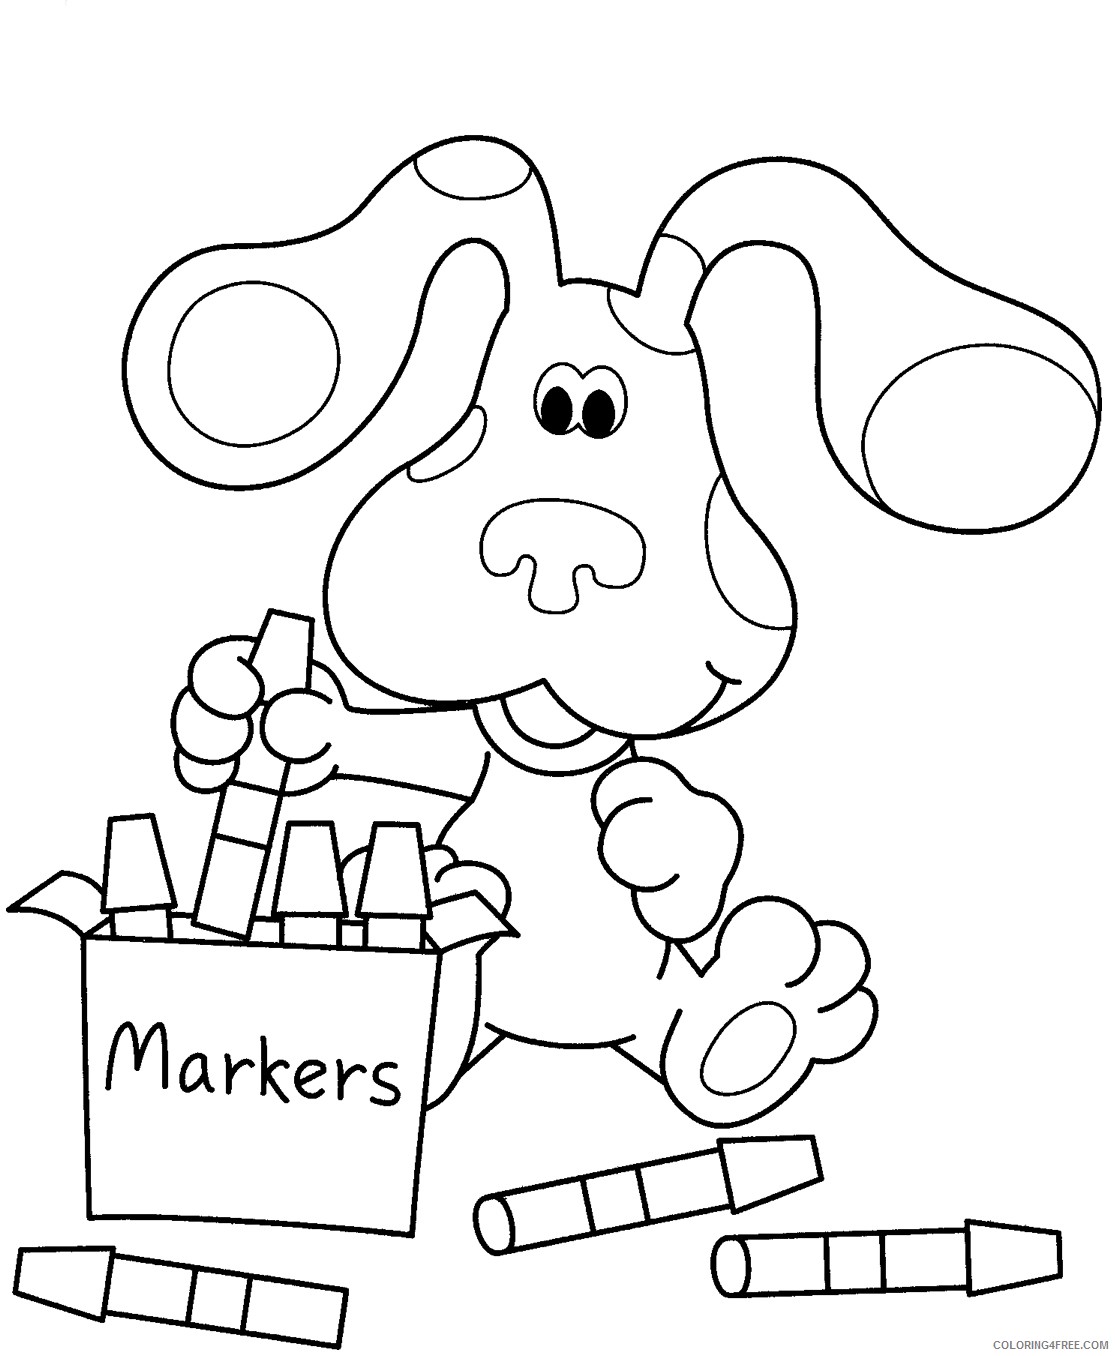 blues clues coloring pages to print Coloring4free